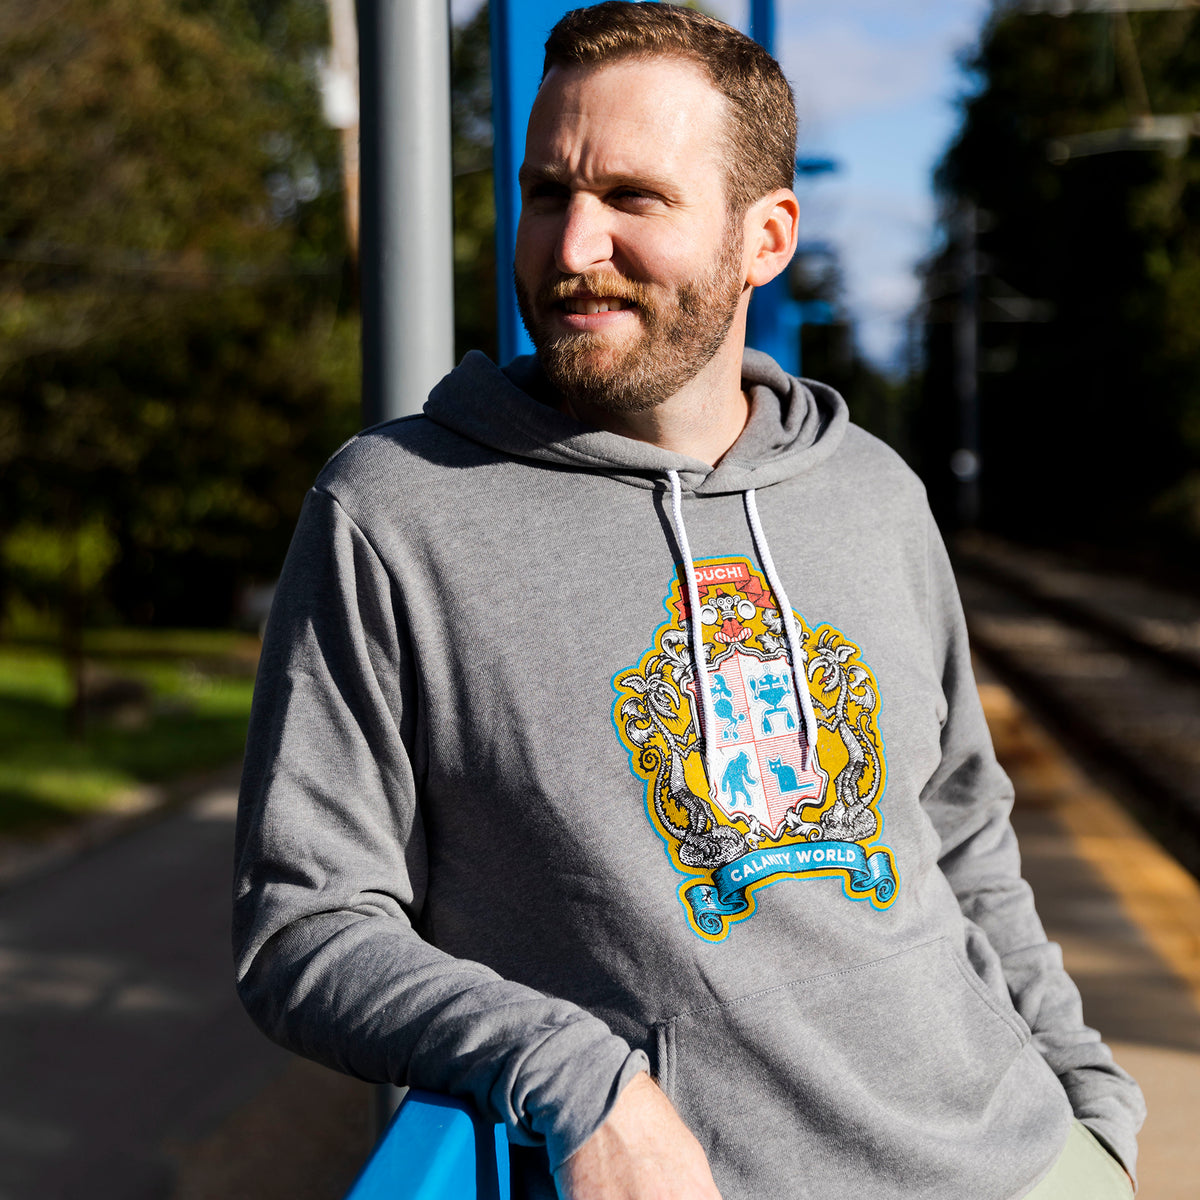 Calamity World Coat-of-Arms Hoodie